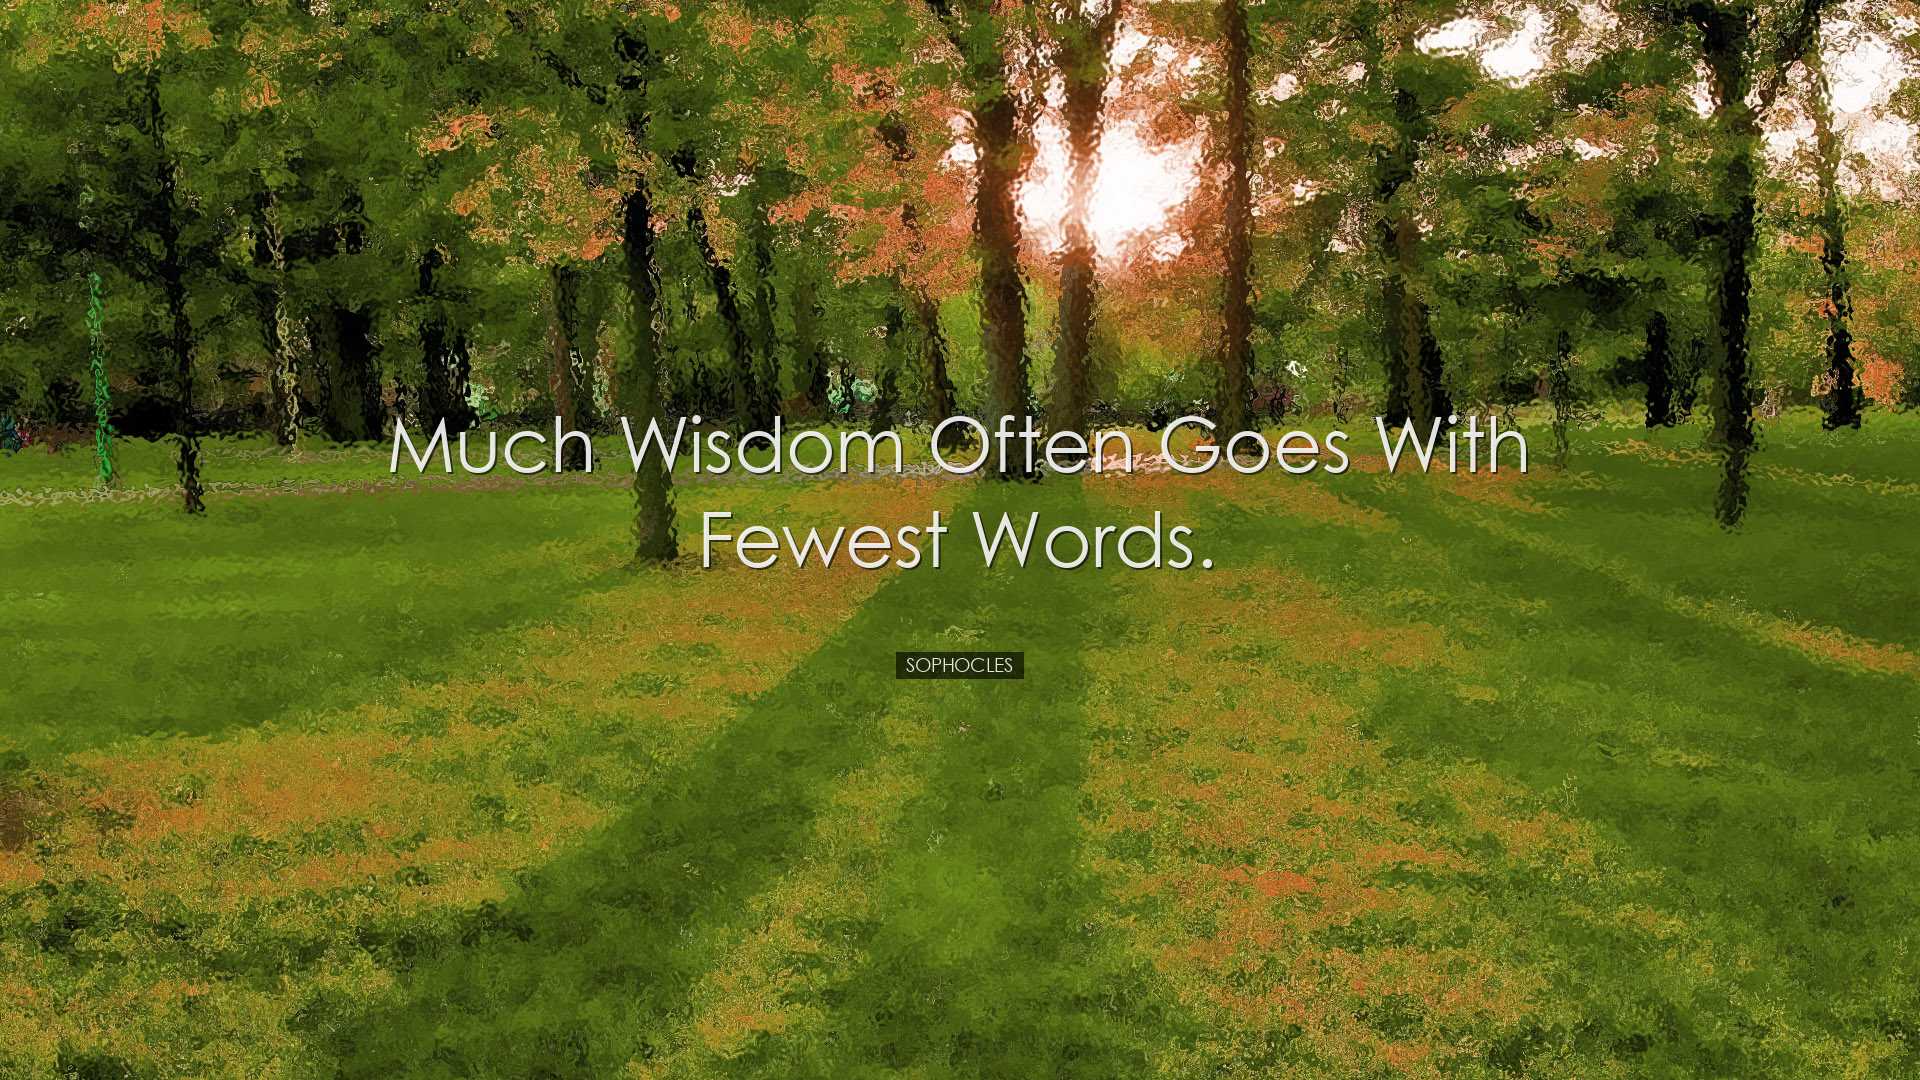 Much wisdom often goes with fewest words. - Sophocles